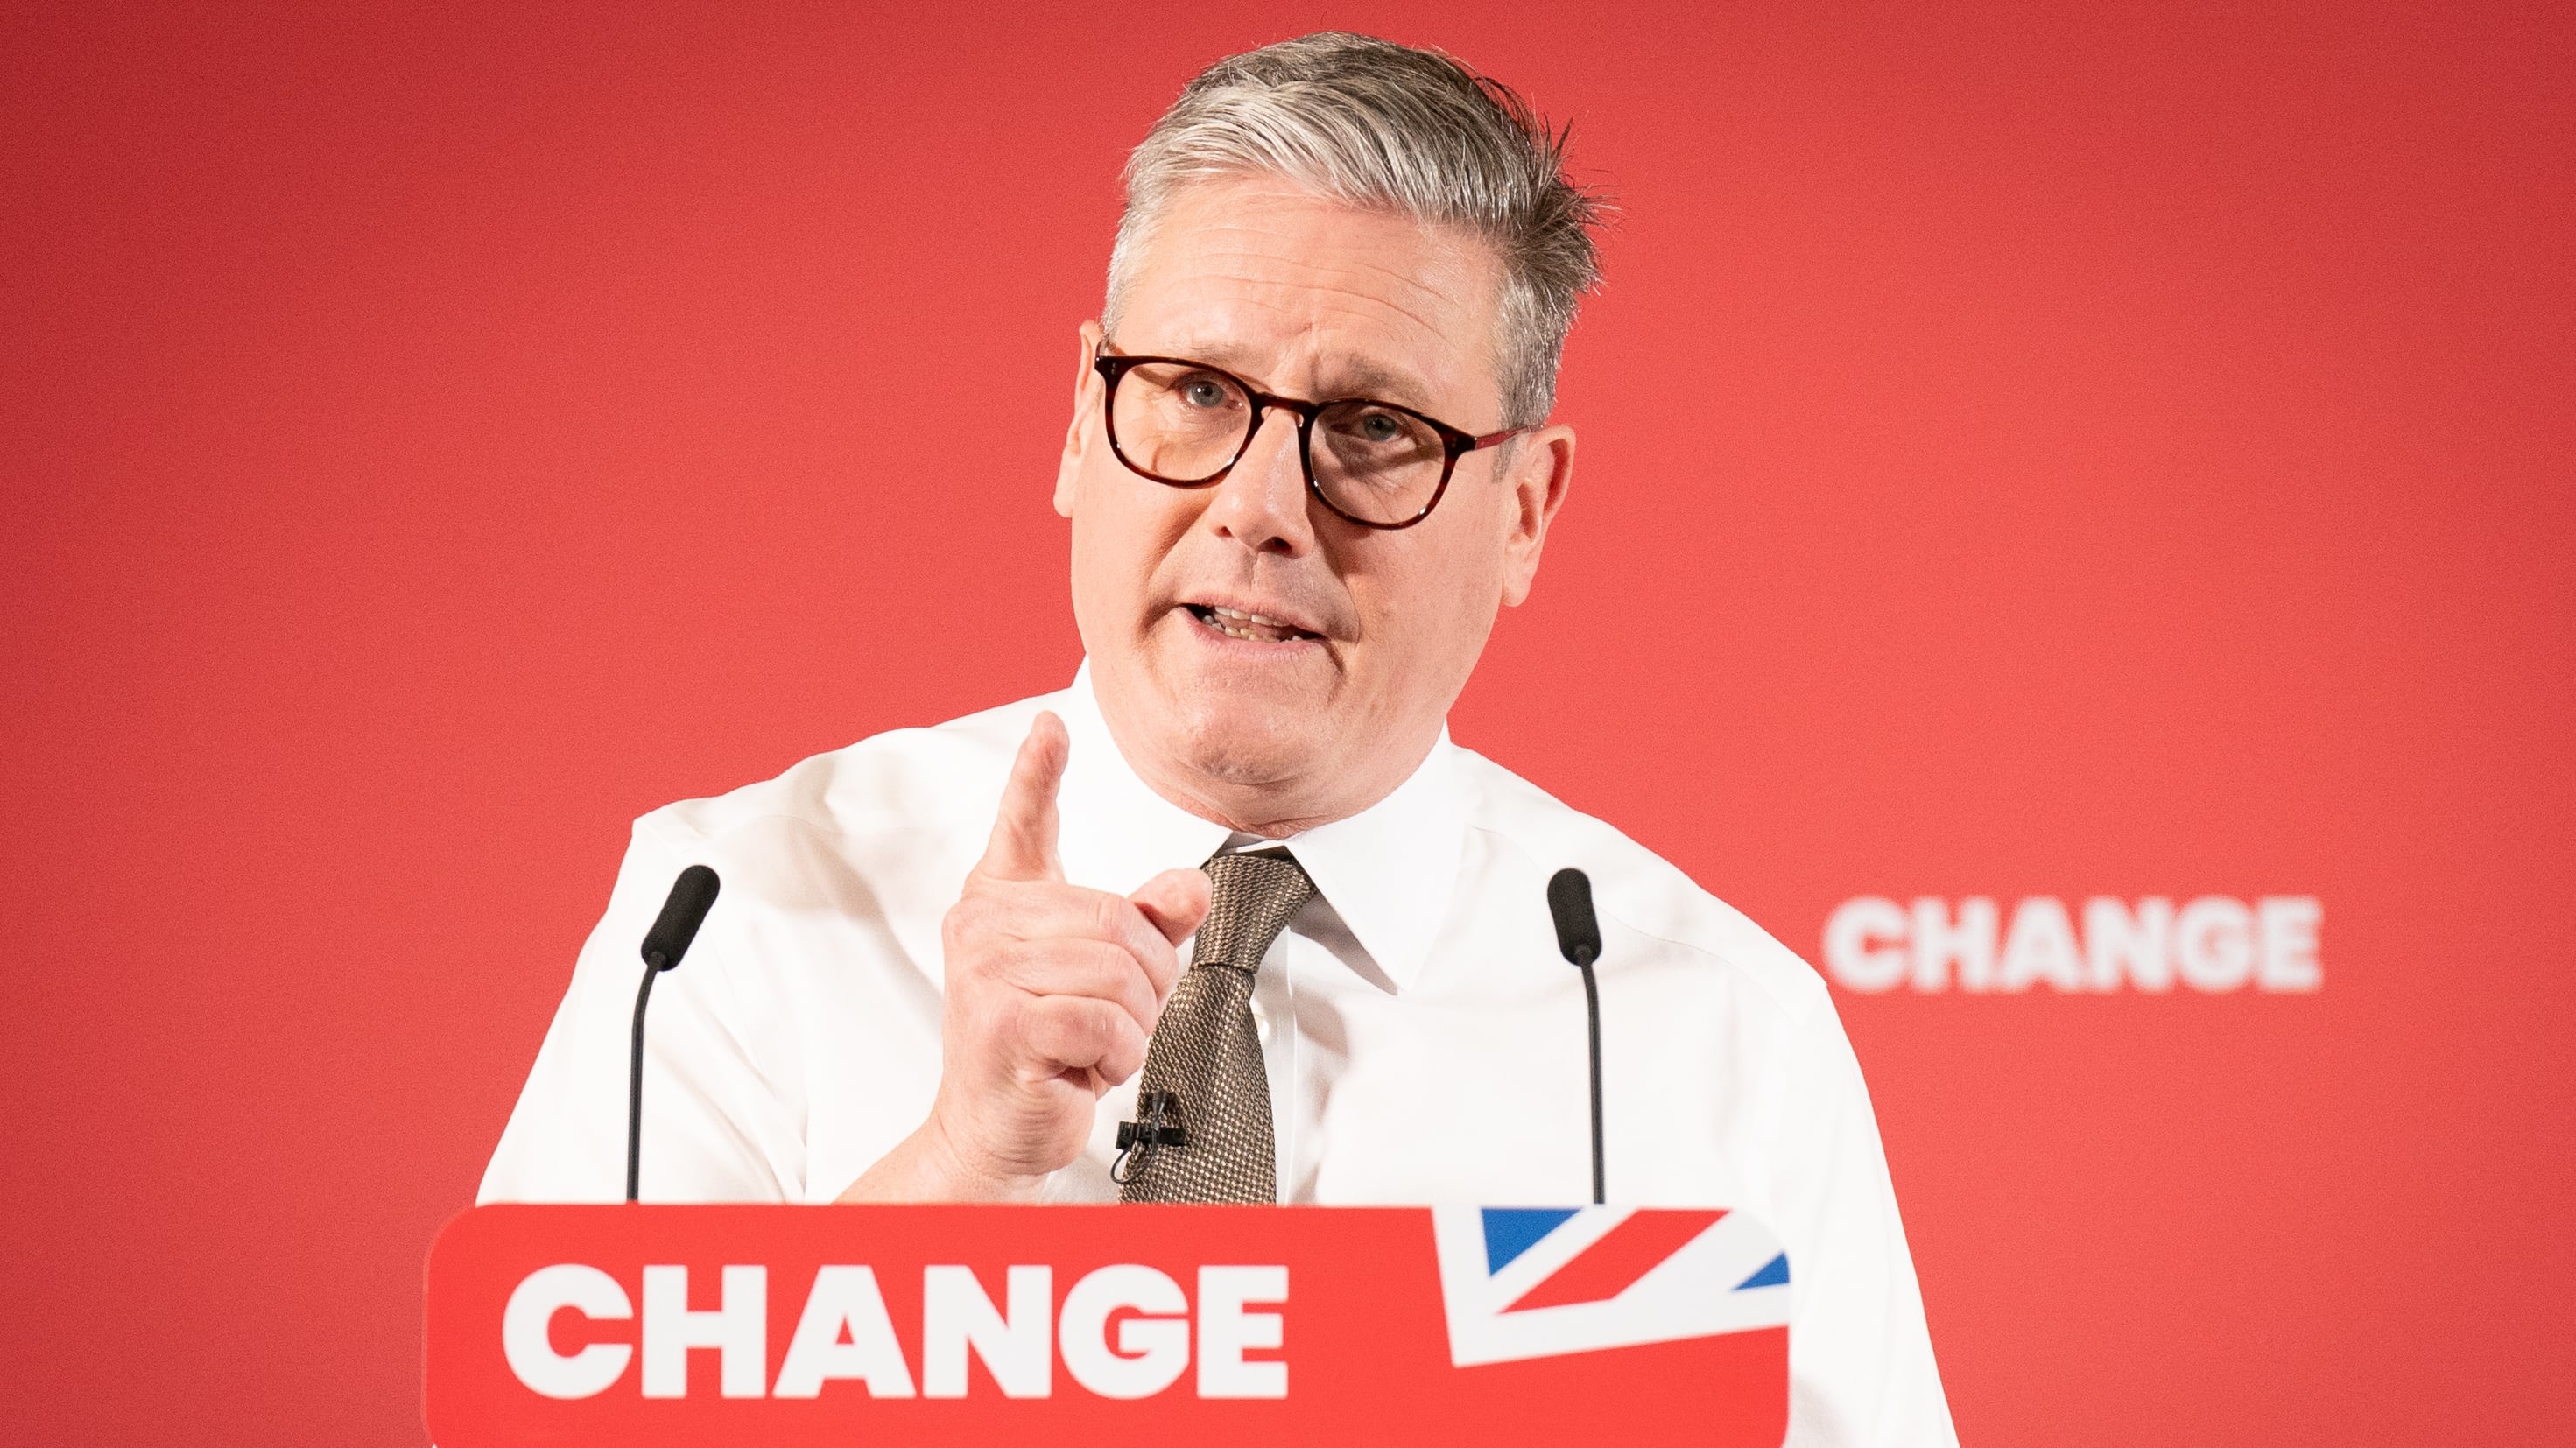 Sir Keir Starmer said Scotland could be ‘key to delivering the change our entire country needs’